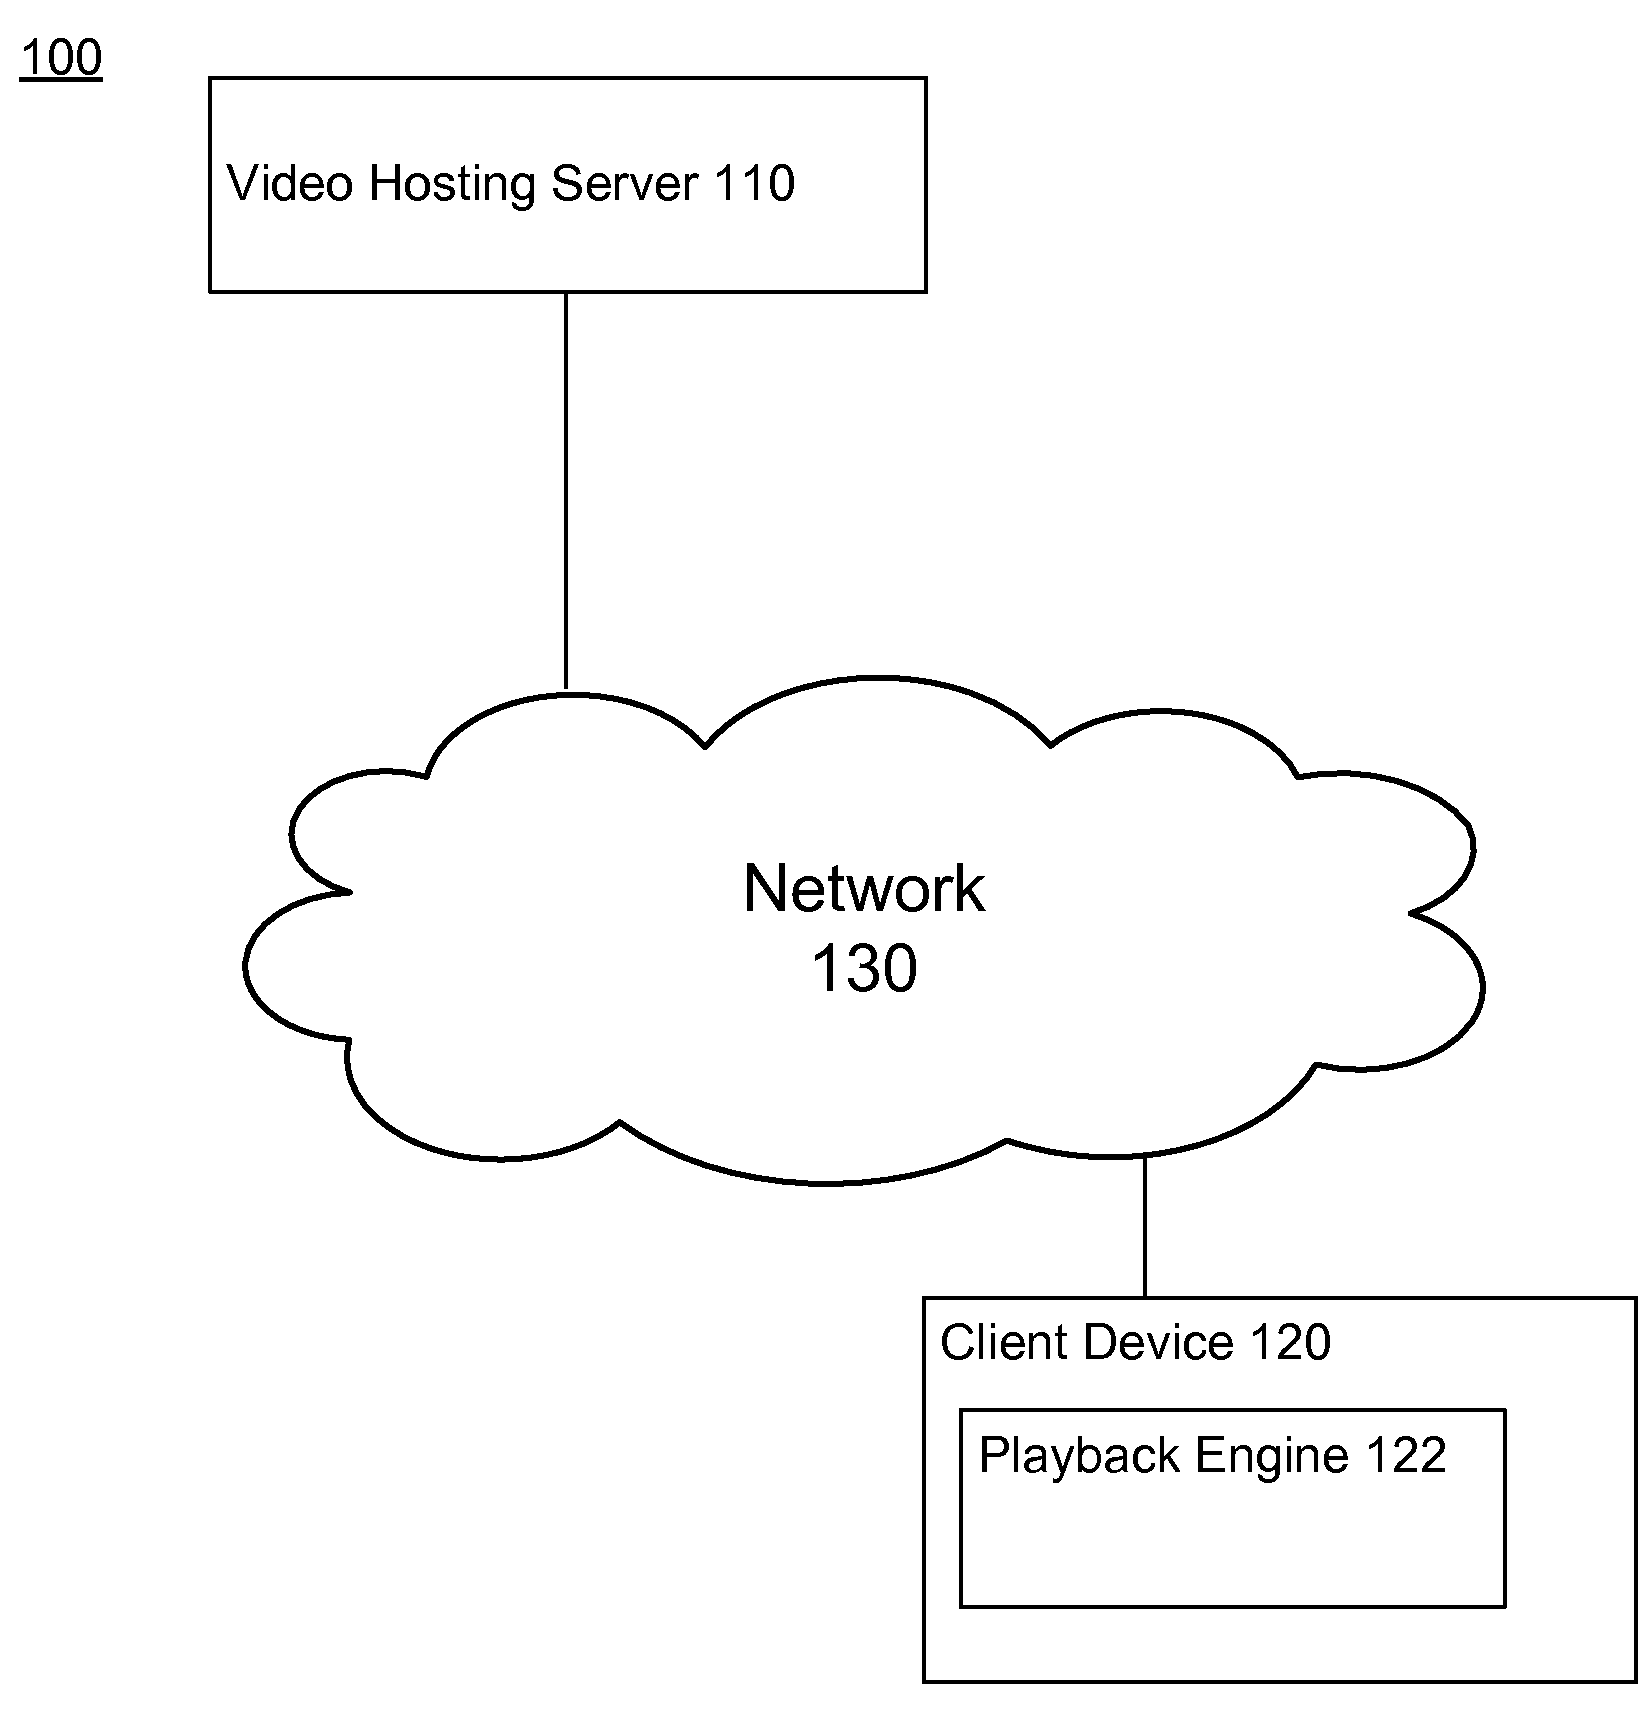 Mechanism for displaying external video in playback engines